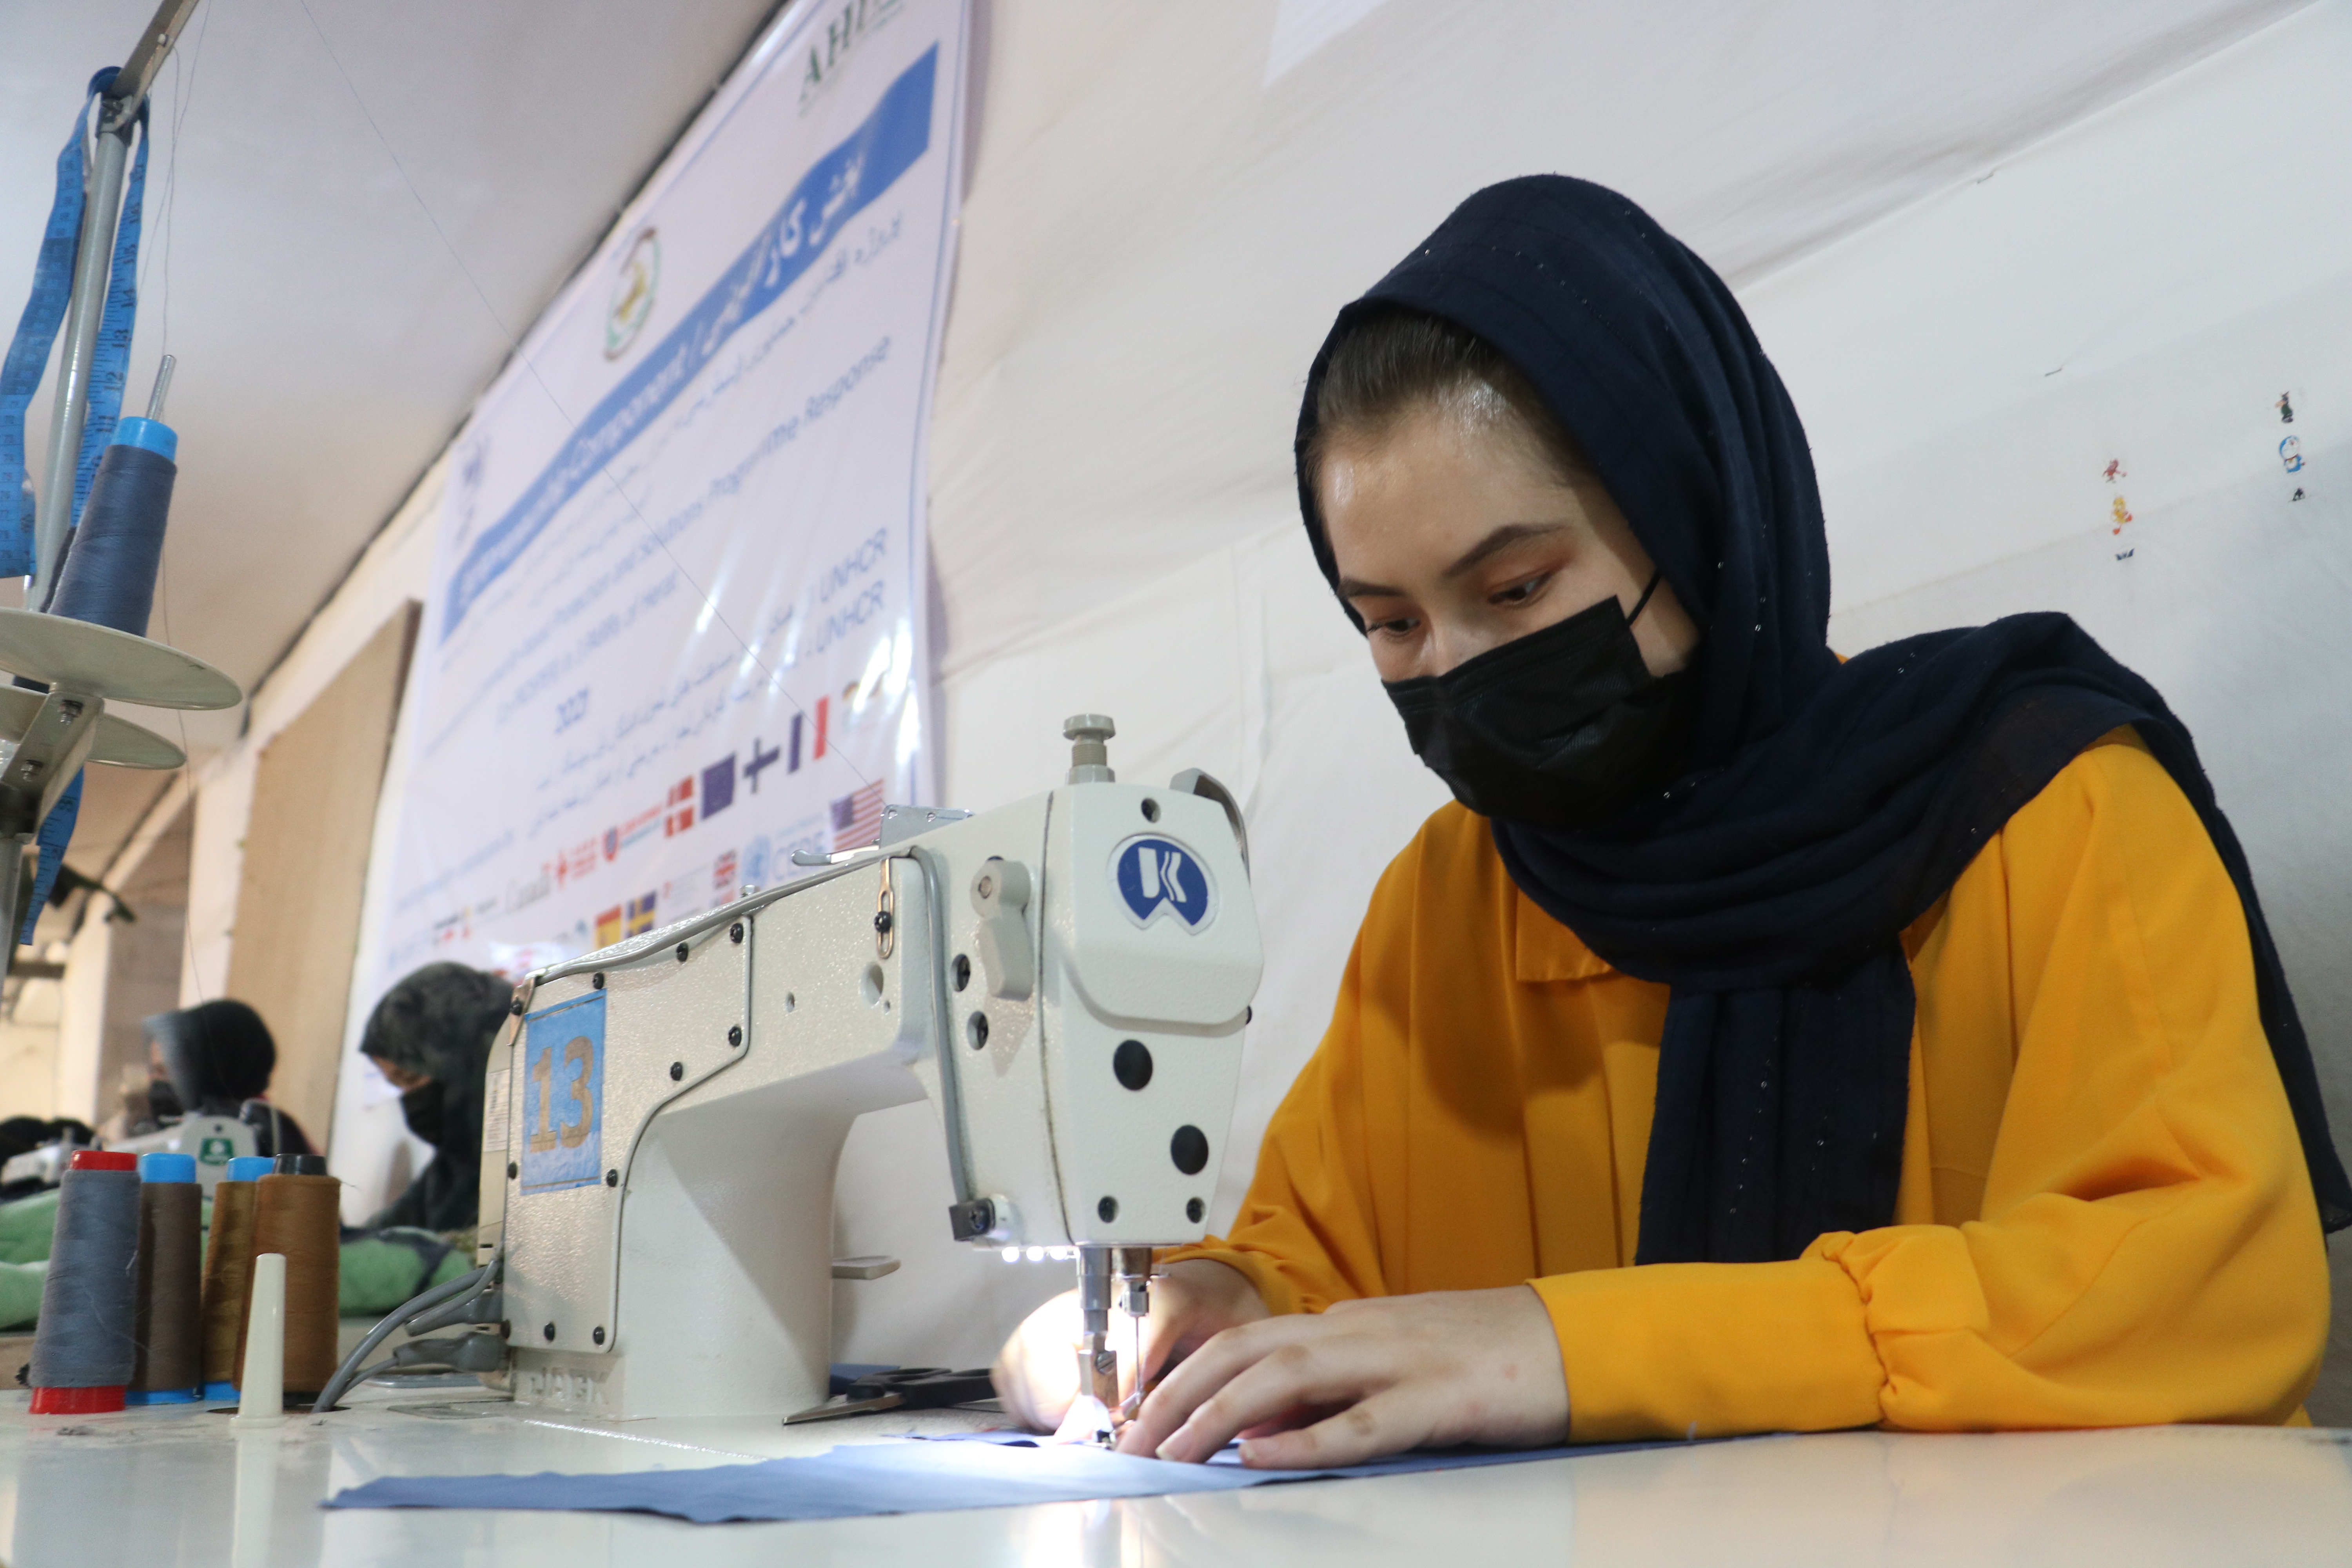  A worker in Bassgull and Ali Reza's garment factory, which employs 120 people in Herat, Afghanistan